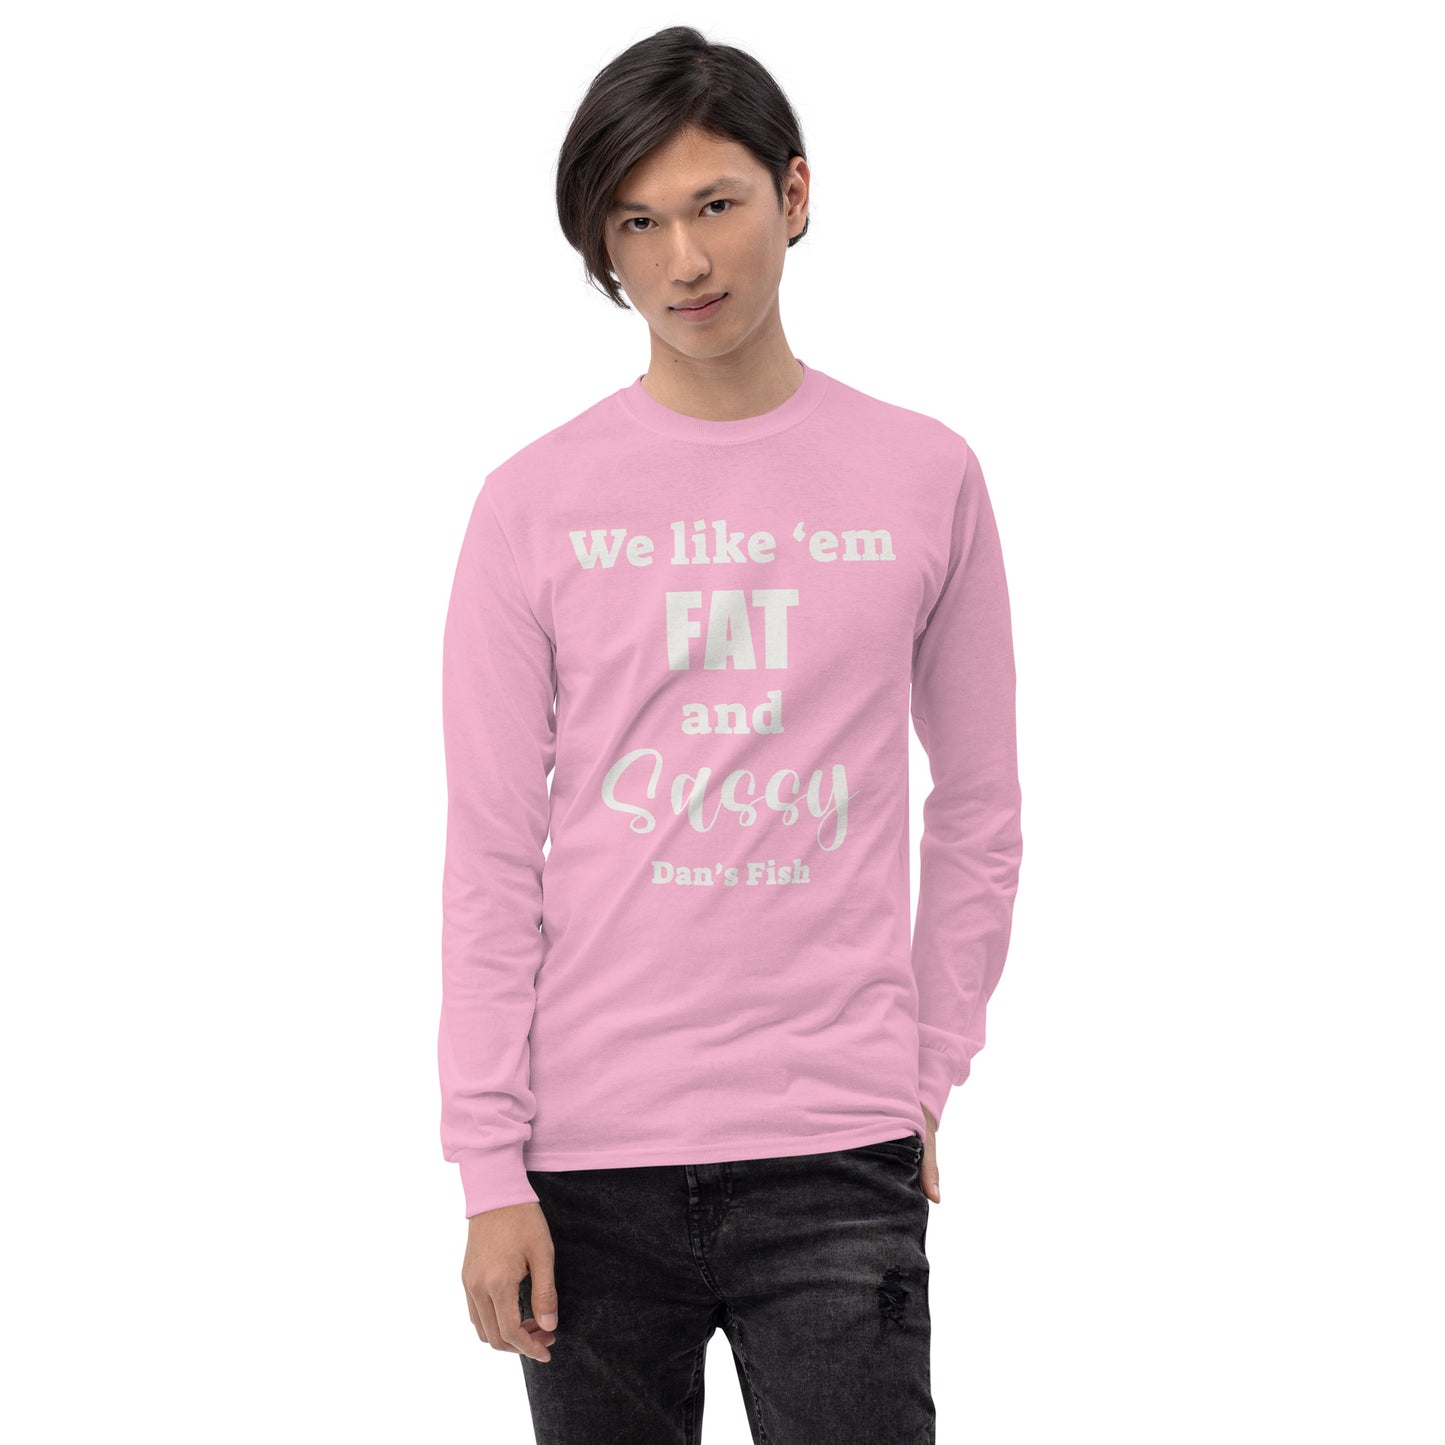 Fat and Sassy Classic Long Sleeve Tee